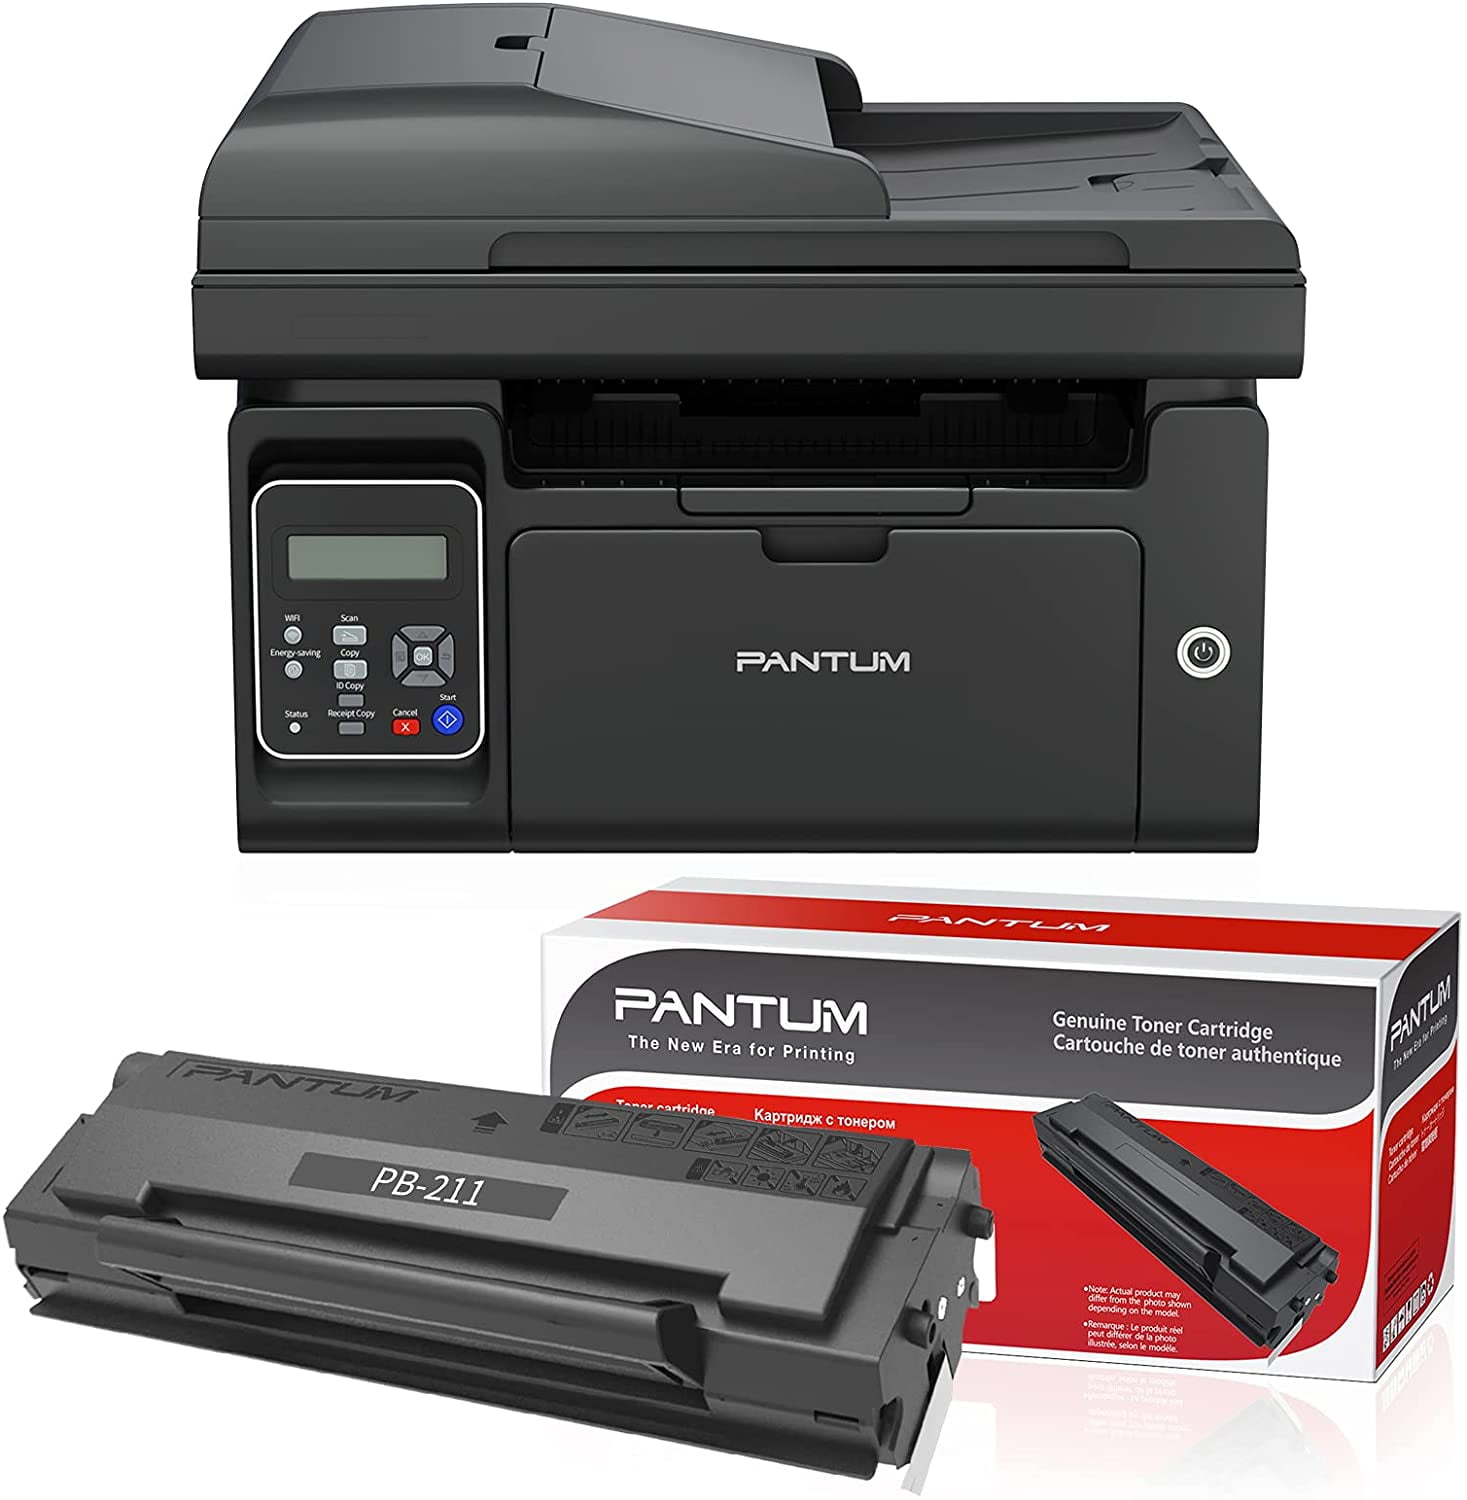 PANTUM Monochrome Laser All-in-One Laser Printer Philippines Ubuy